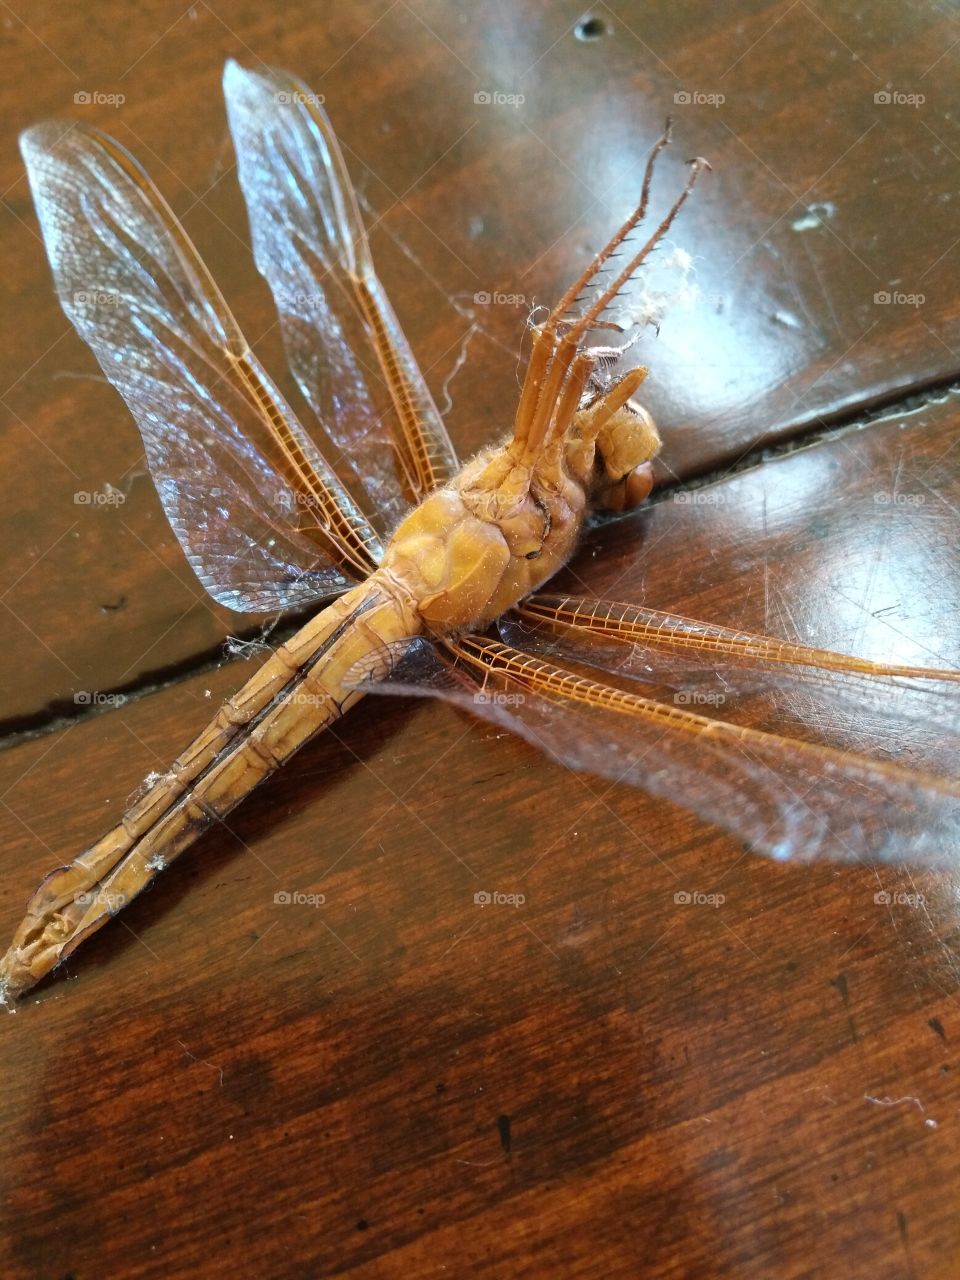 a perfectly preserved dragonfly I found at work today. The summer heat must have gotten to him.